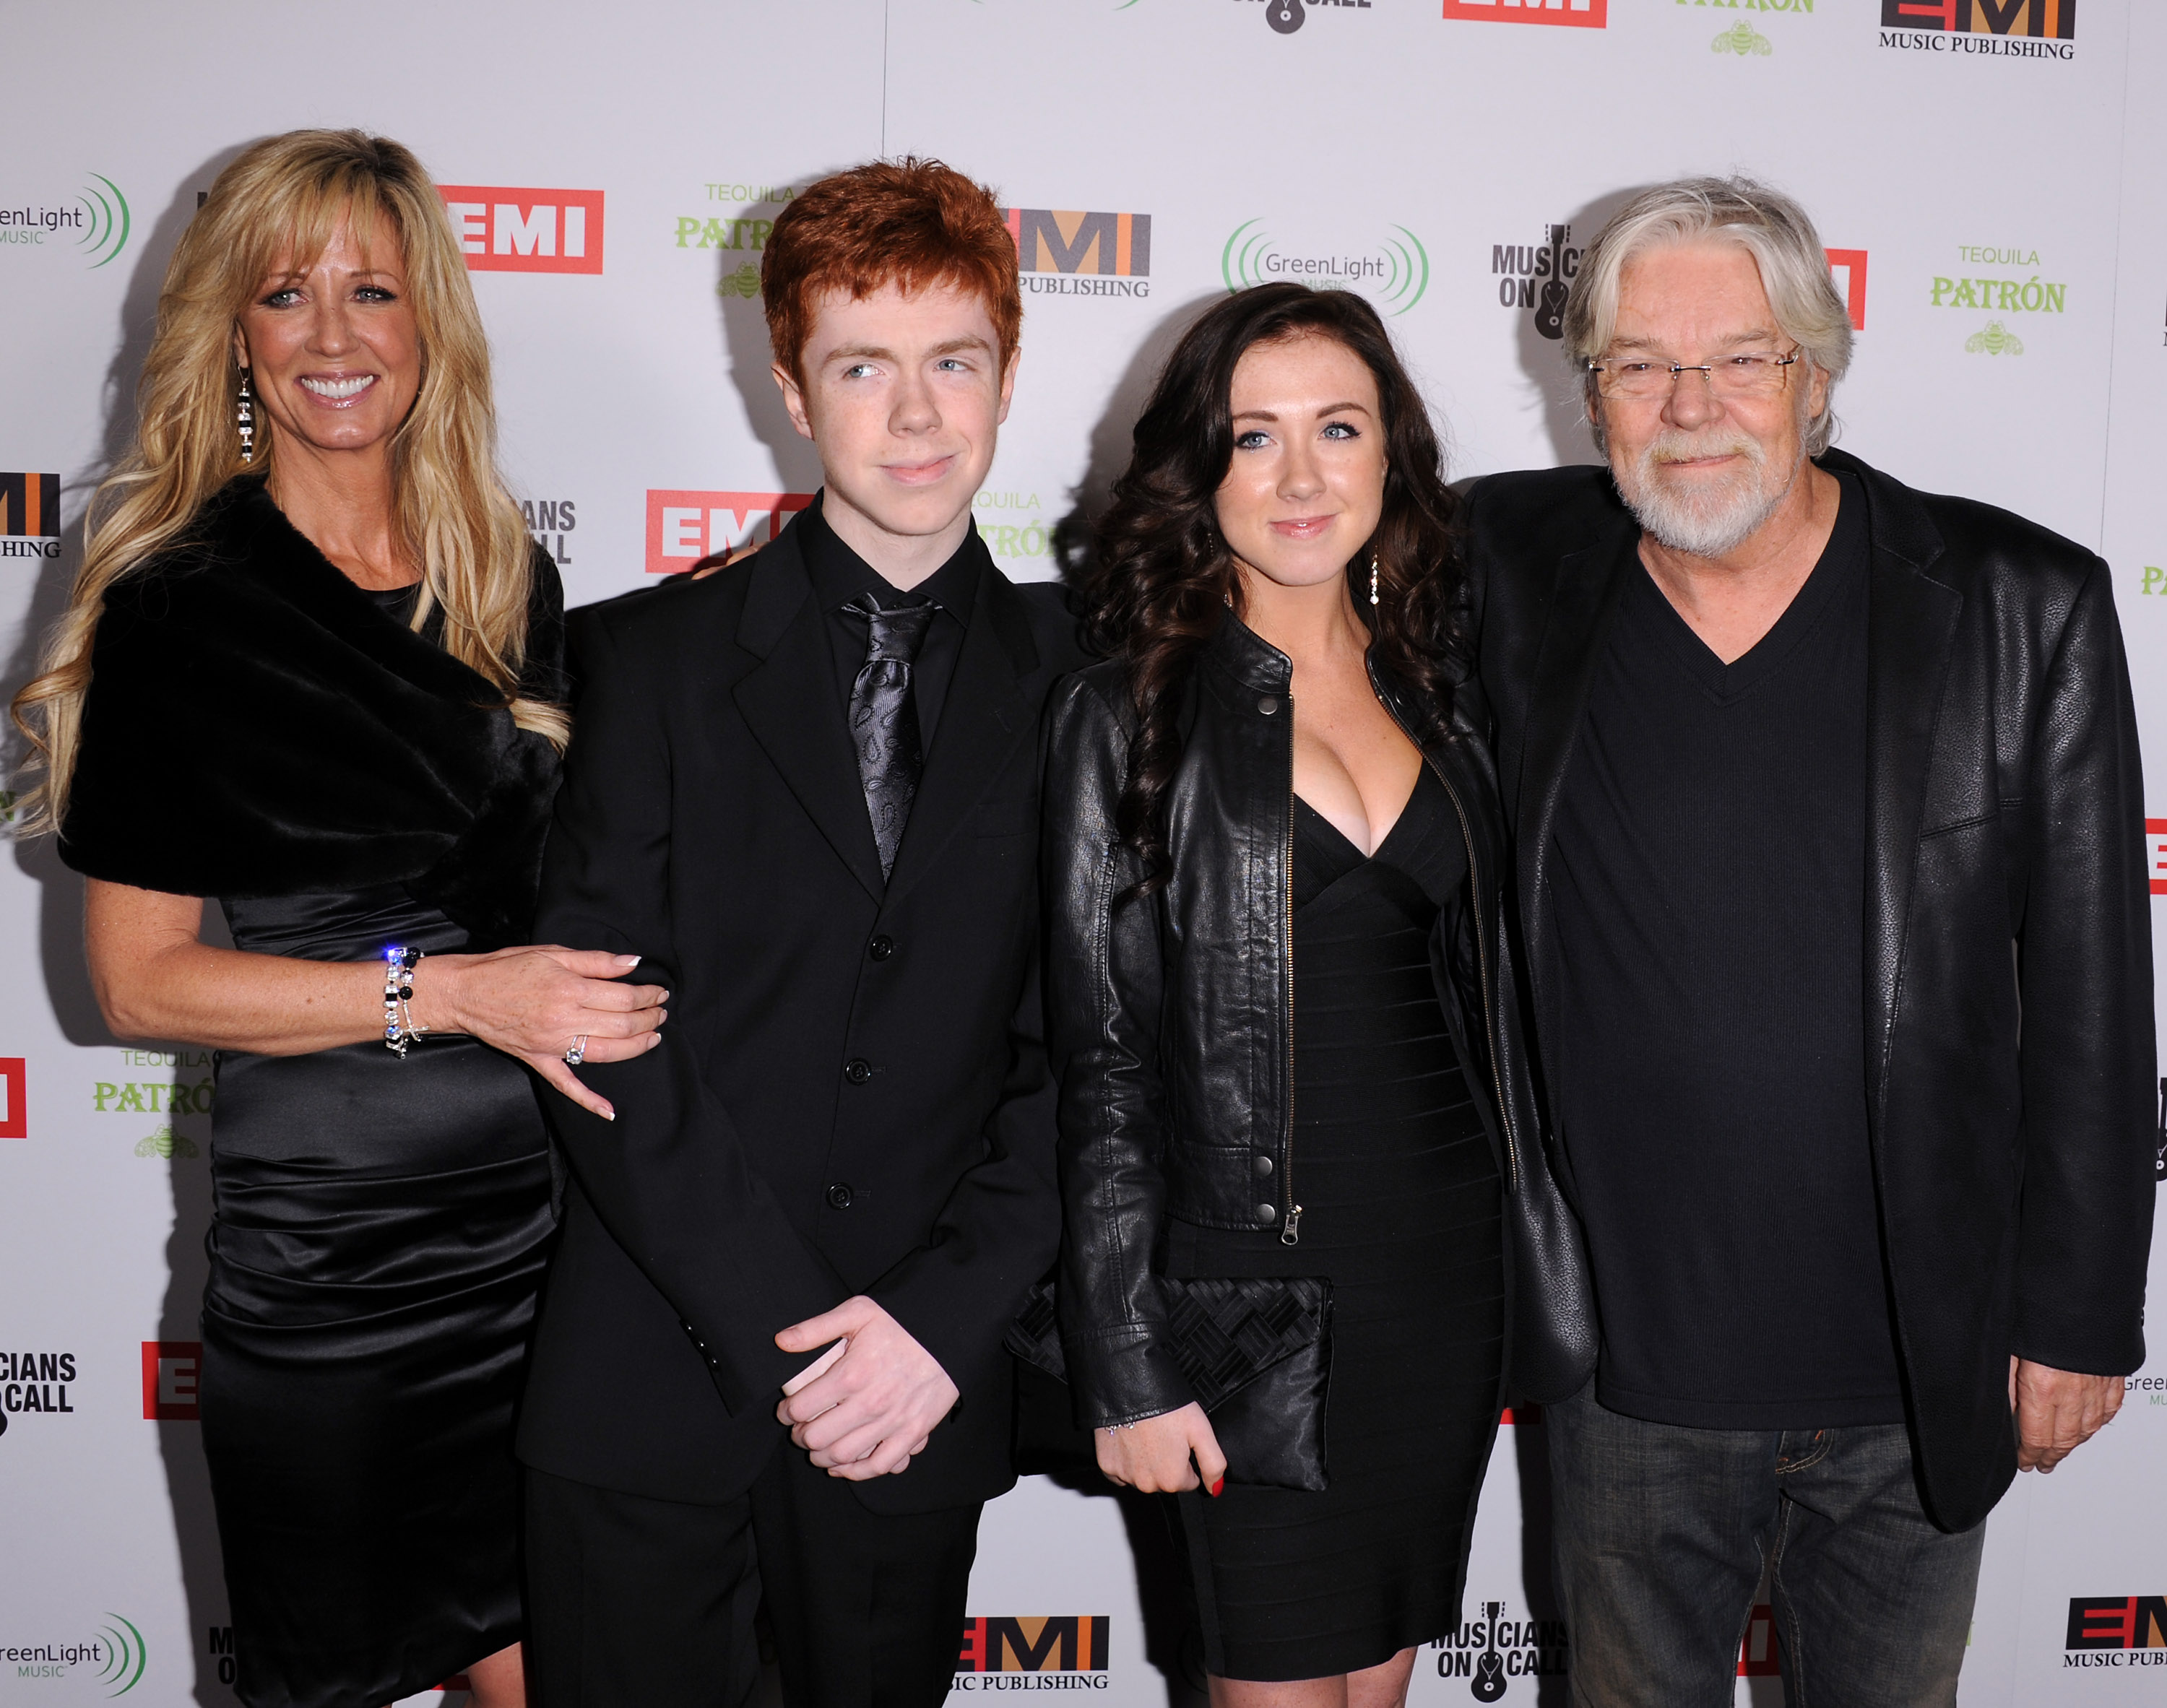 Juanita Dorricott and Bob Seger with their children at the Grammys After Party on February 12, 2012, in Hollywood, California. | Source: Getty Images